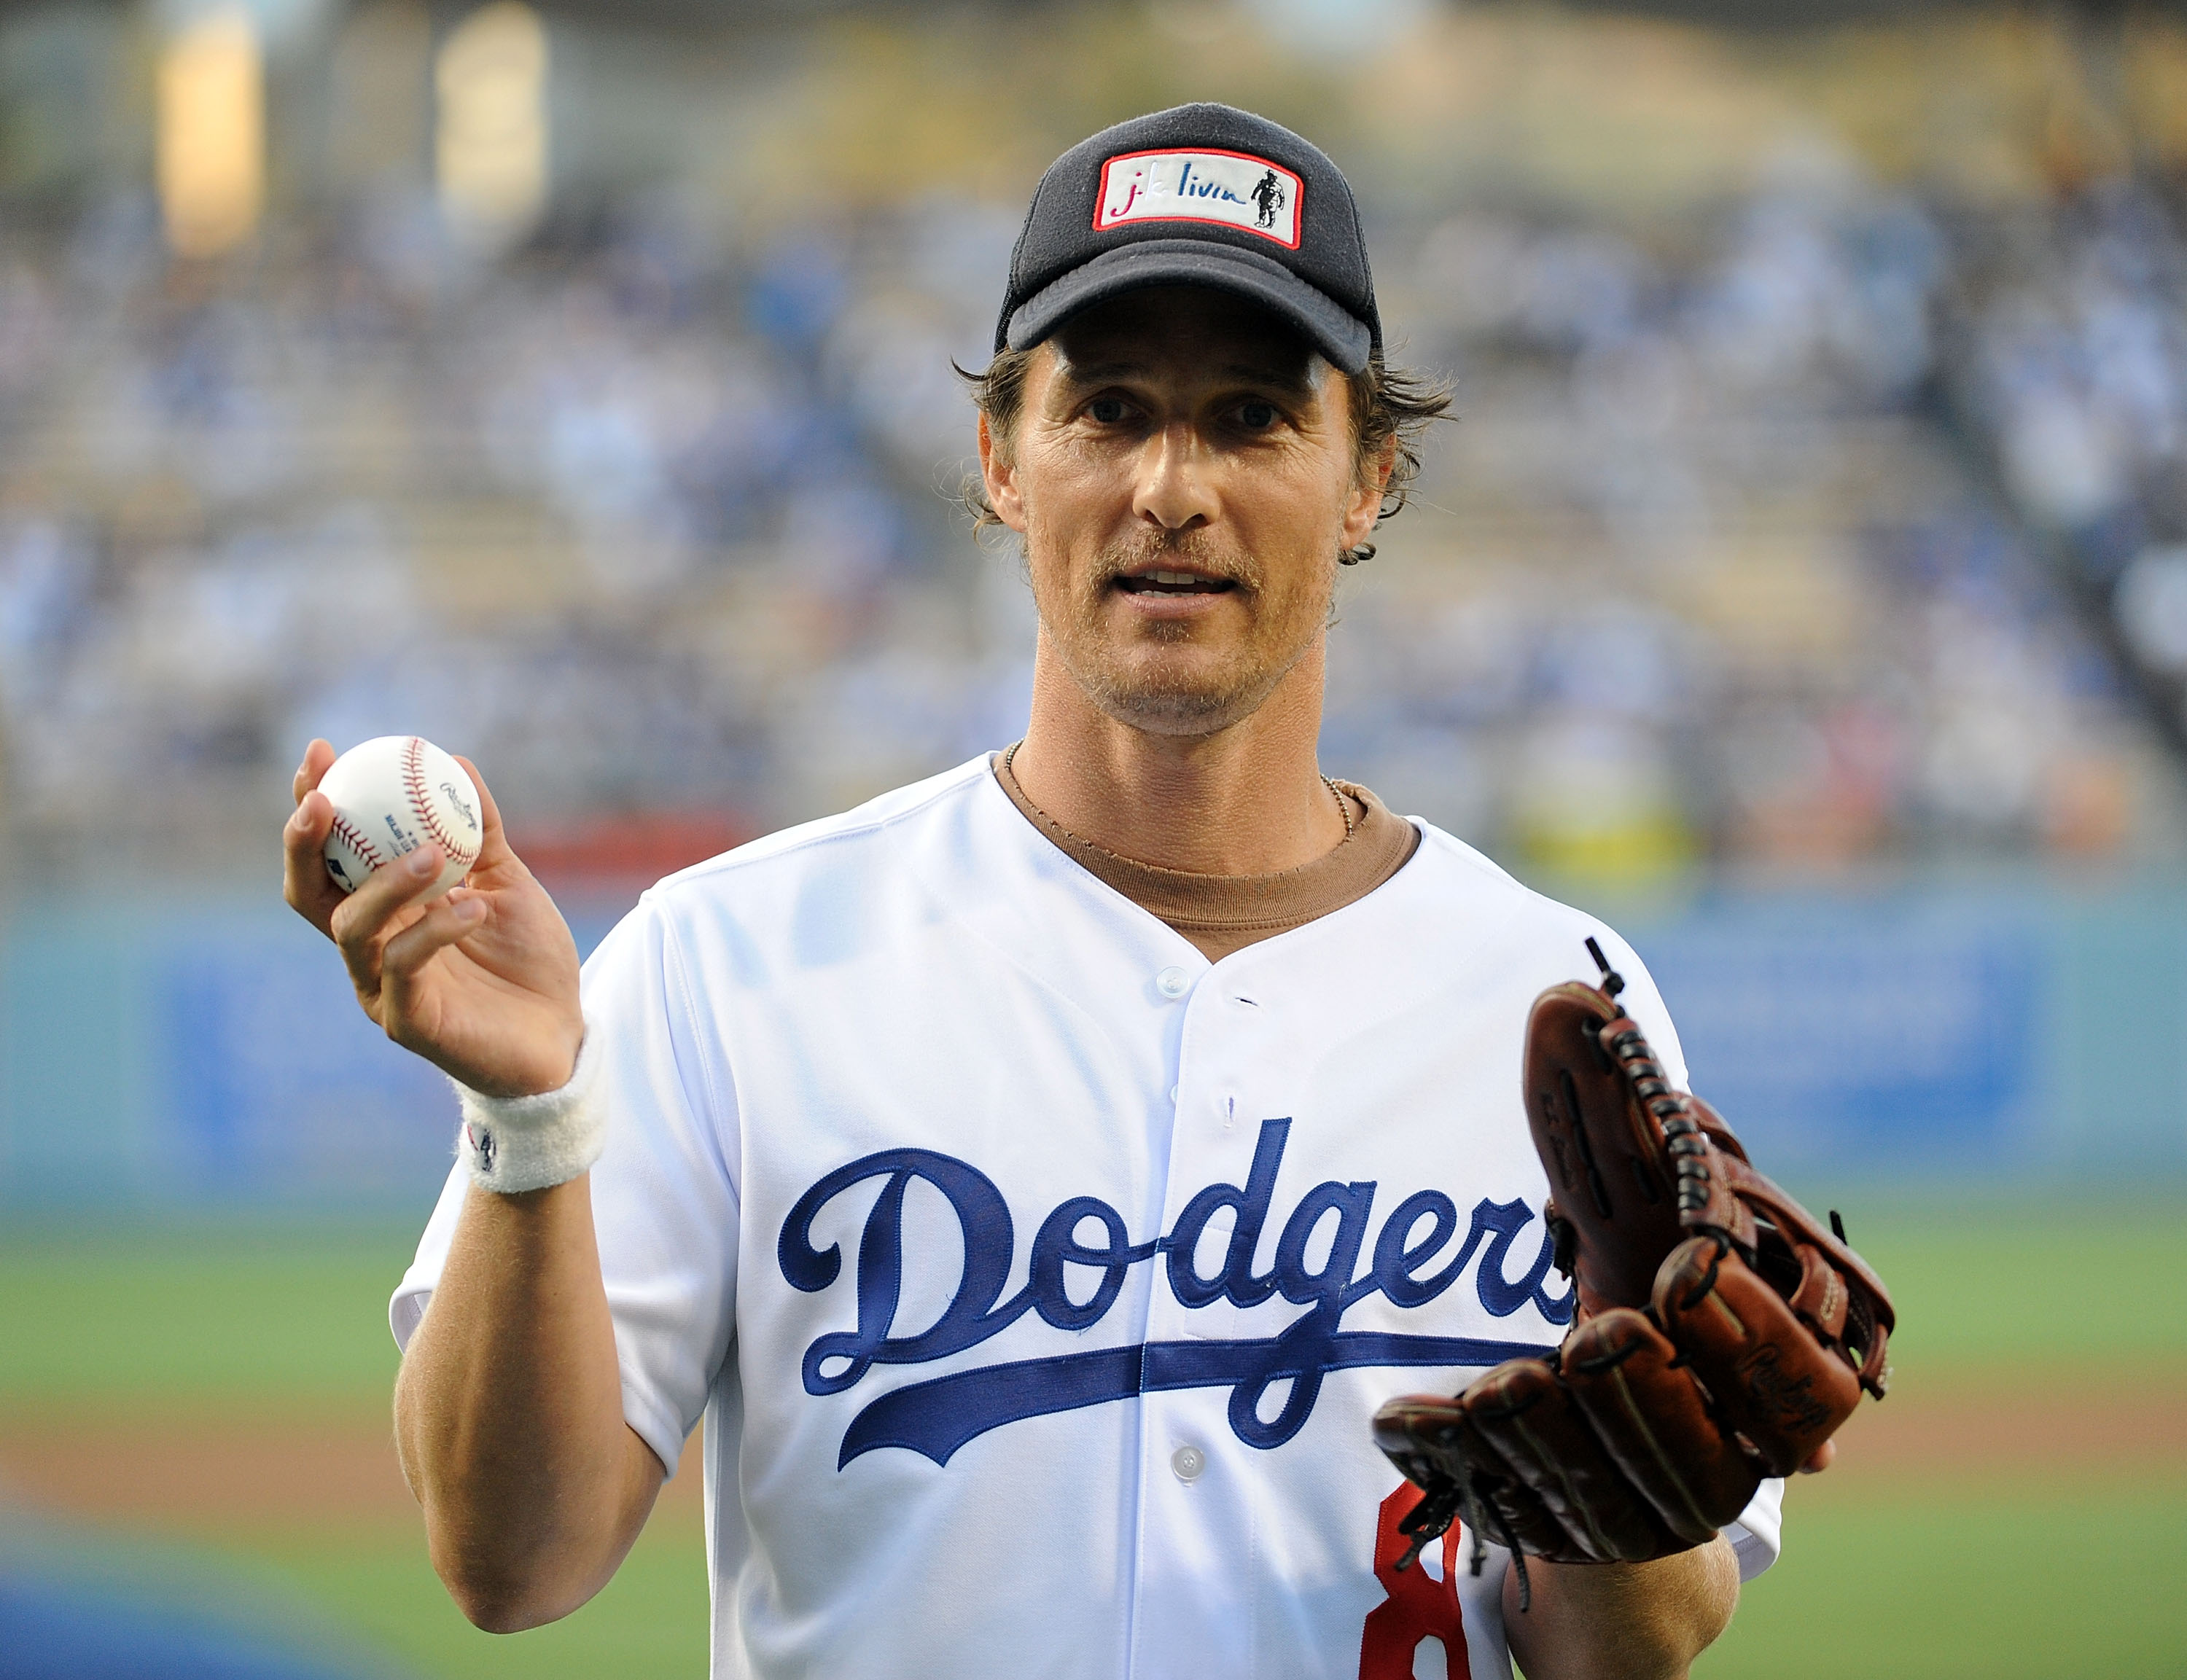 Celebrities at Los Angeles Dodgers games